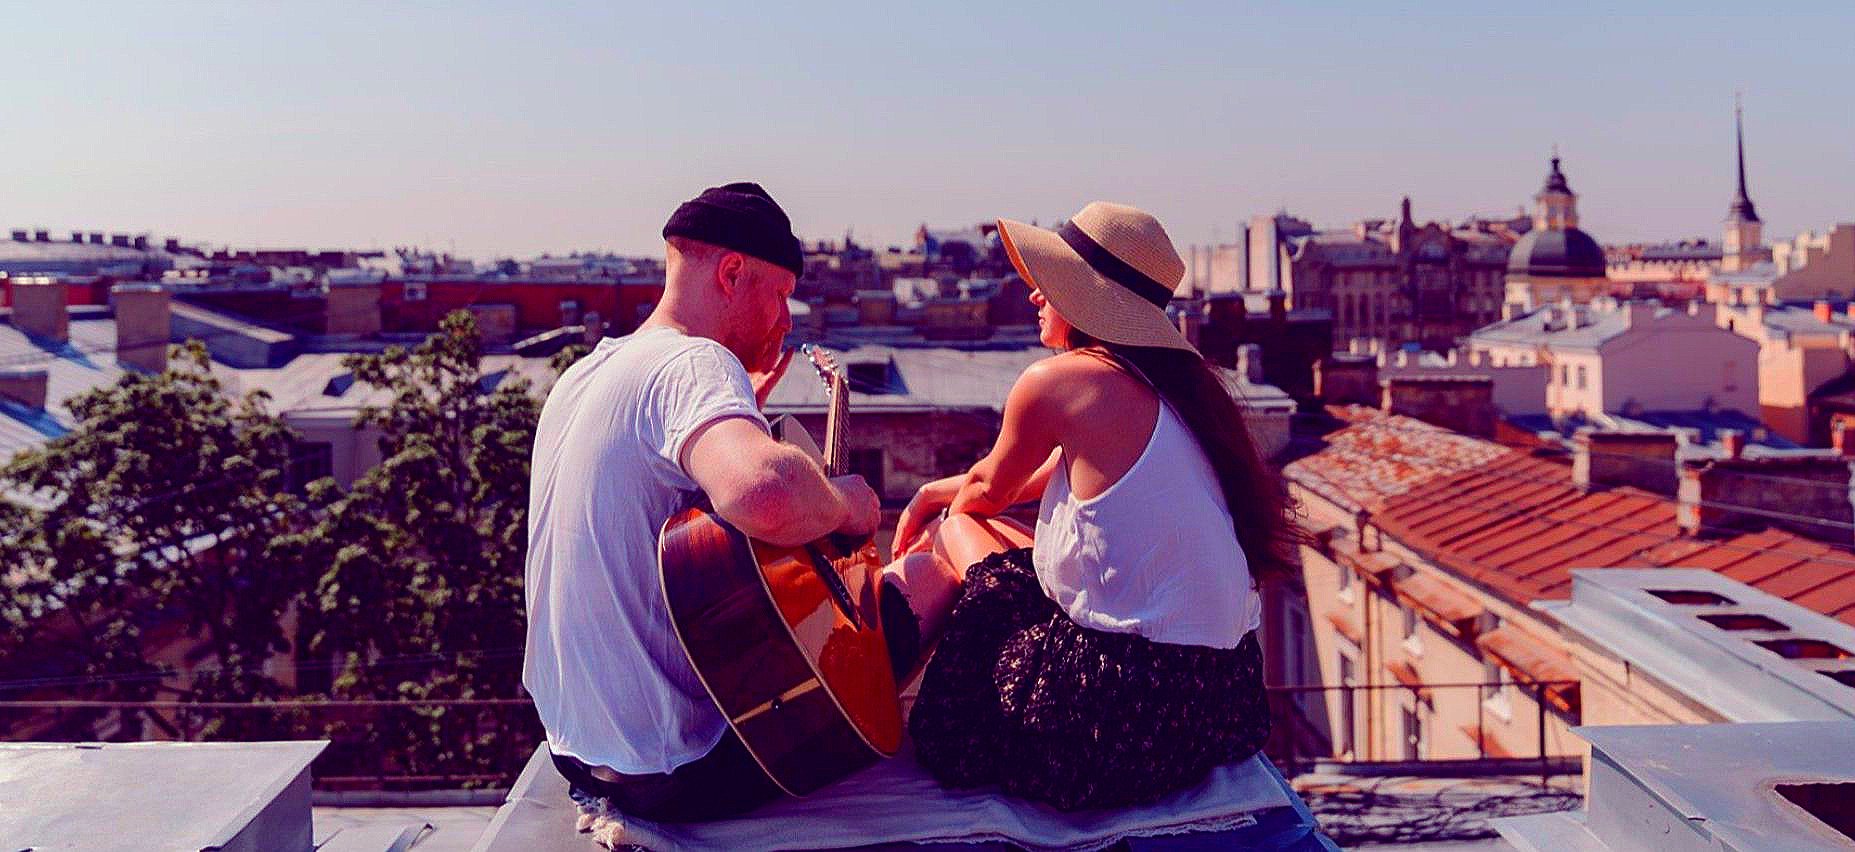 musicians rehearsing on a rooftop